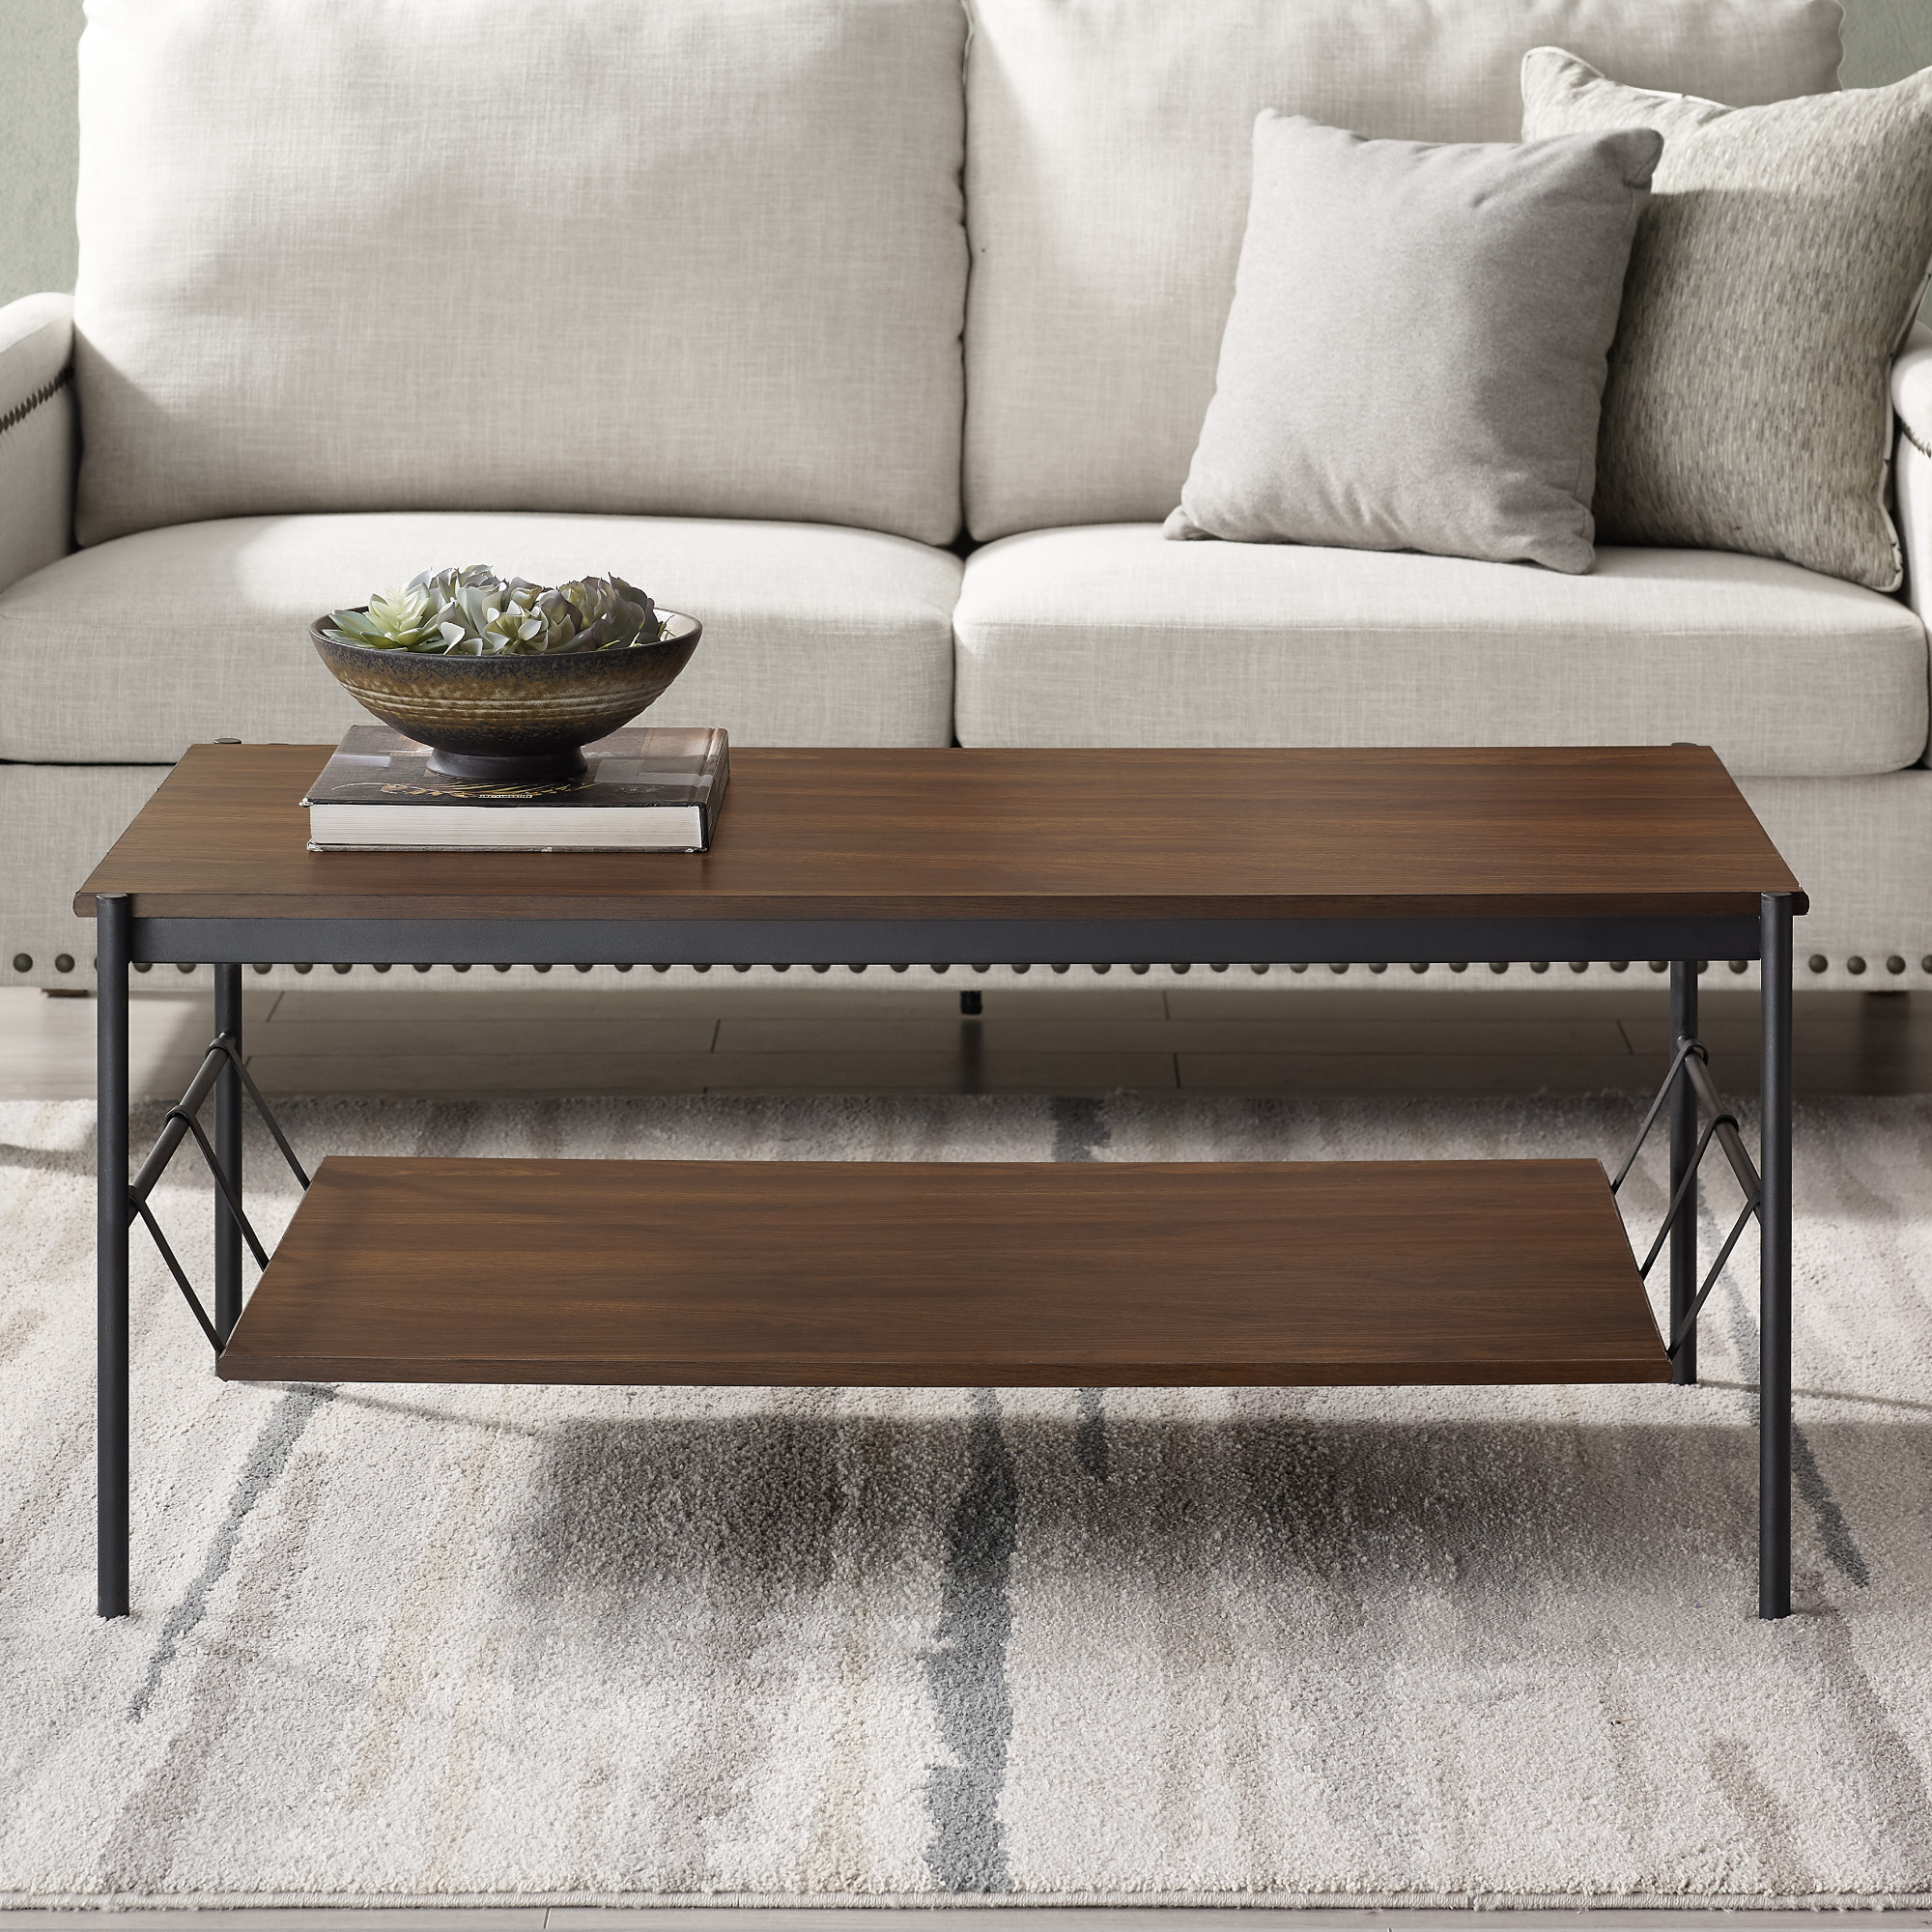 Manor Park Modern Coffee Table with Removable Shelf, Dark Walnut - image 2 of 6